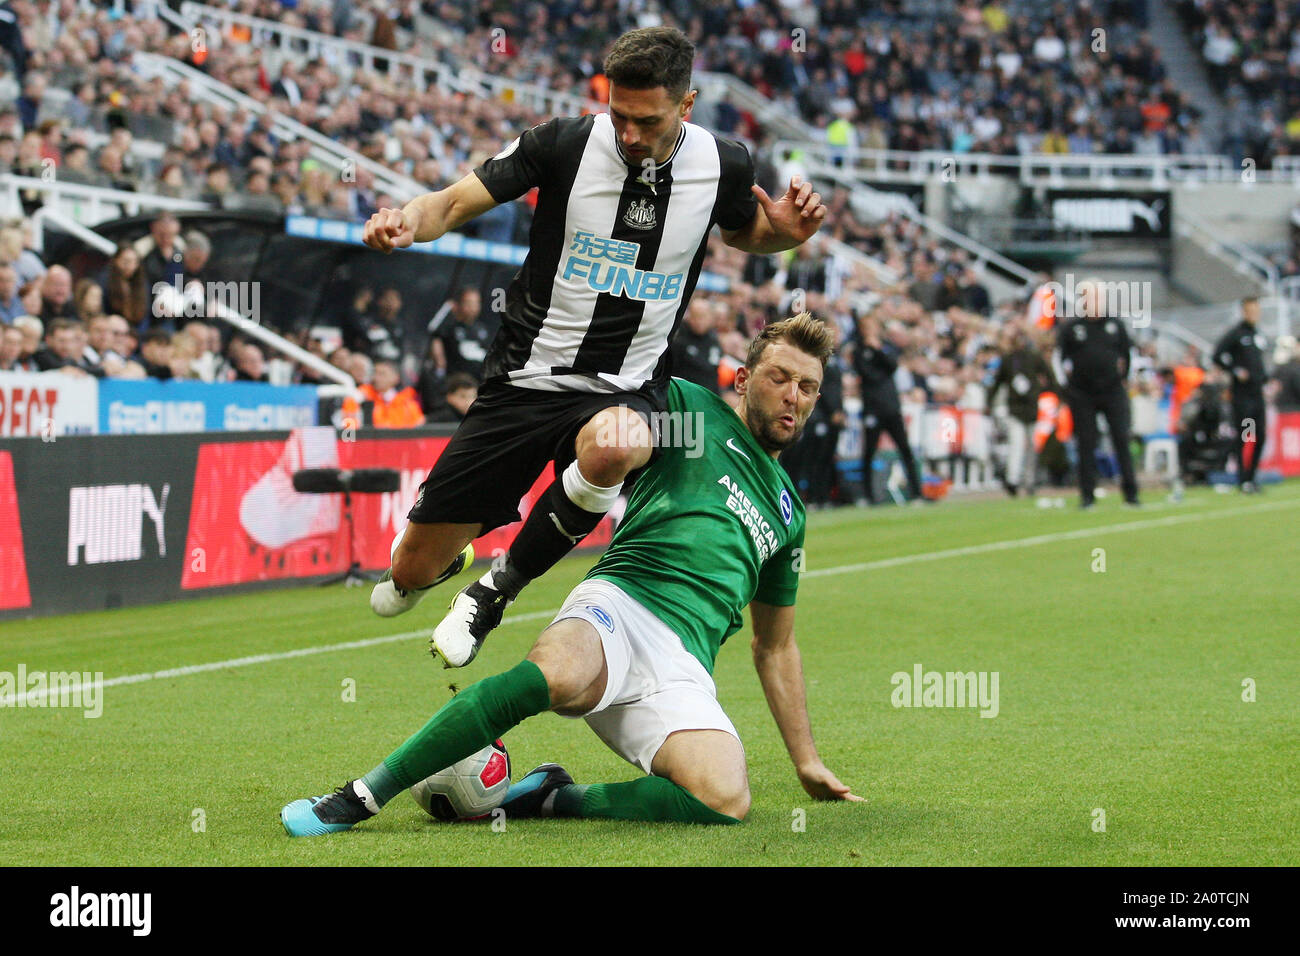 Newcastle, UK. 21st Sep, 2019.  Newcastle United's Fabian Schar competes for the ball with Brighton & Hove Albion's Dale Stephens during the Premier League match between Newcastle United and Brighton and Hove Albion at St. James's Park, Newcastle on Saturday 21st September 2019. (Credit: Steven Hadlow | MI News) Photograph may only be used for newspaper and/or magazine editorial purposes, license required for commercial use Credit: MI News & Sport /Alamy Live News Stock Photo